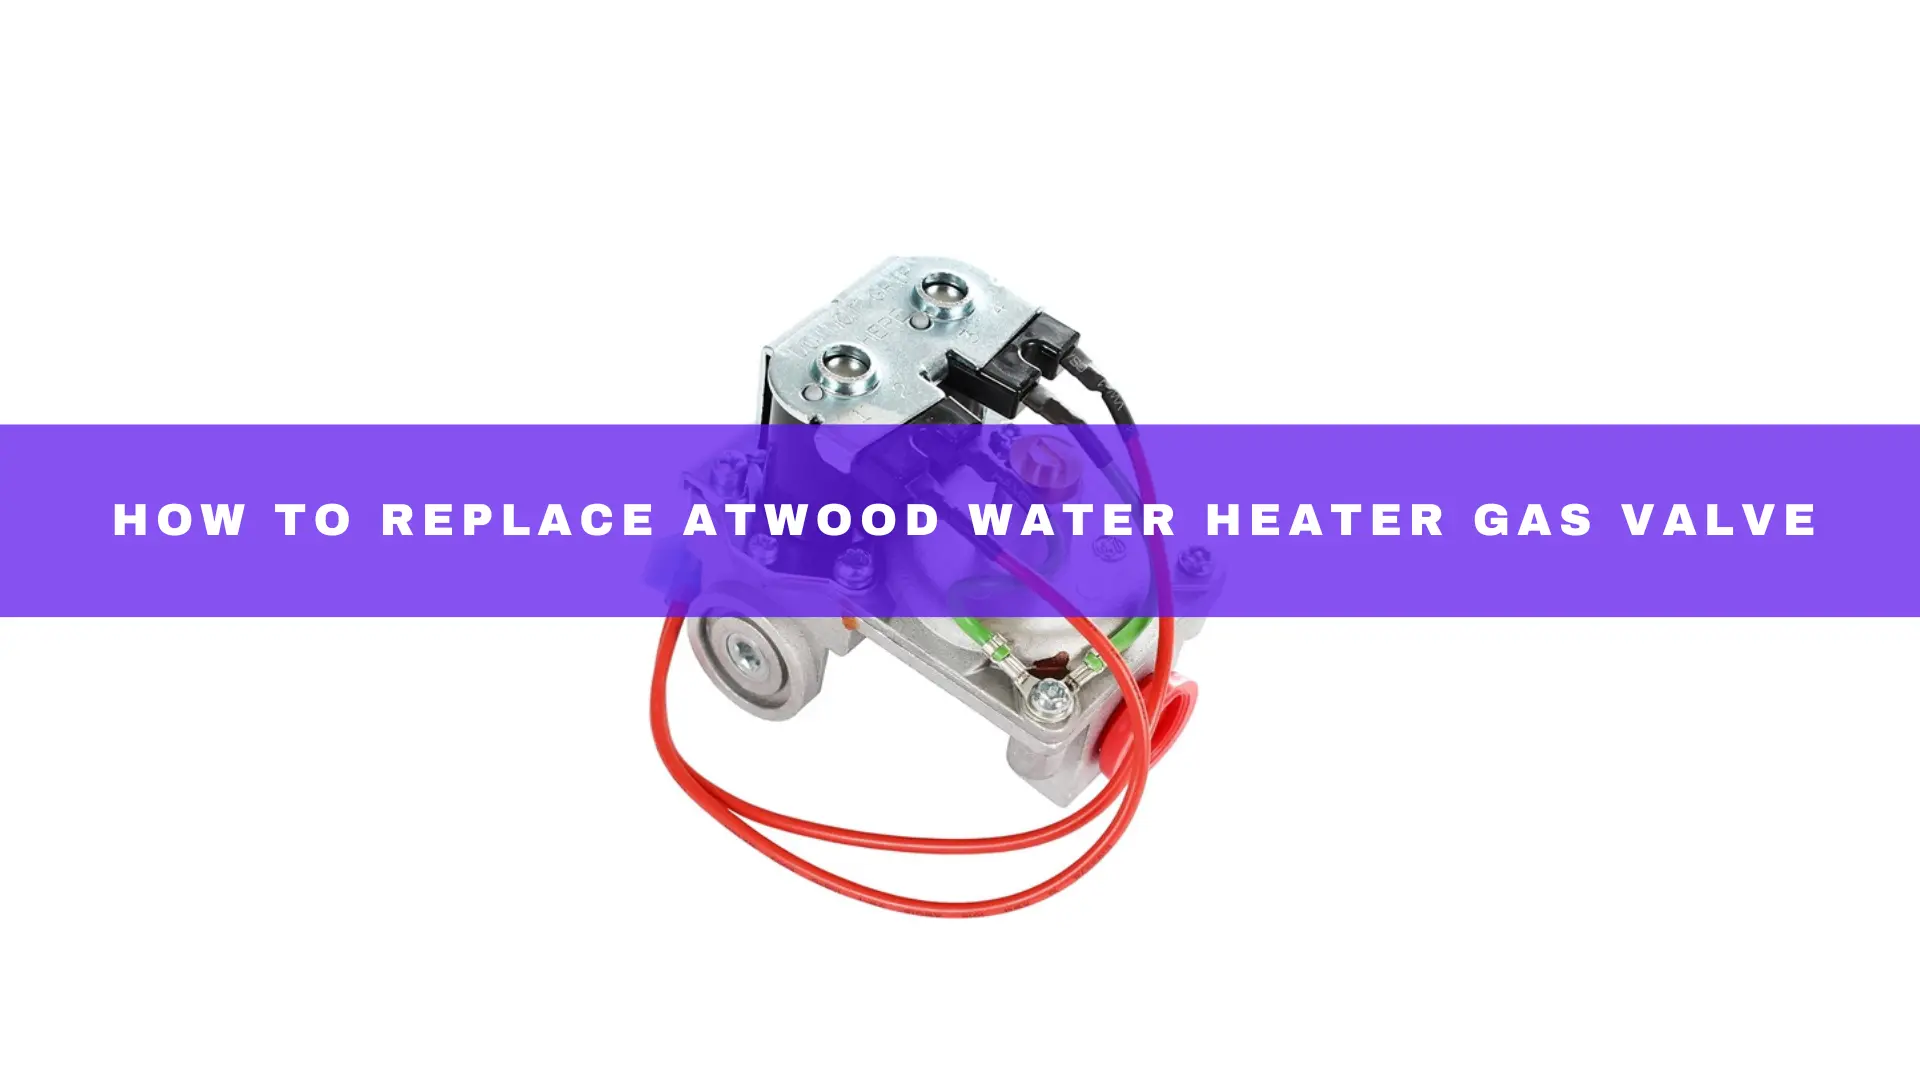 Atwood Water Heater Gas Valve Replacement